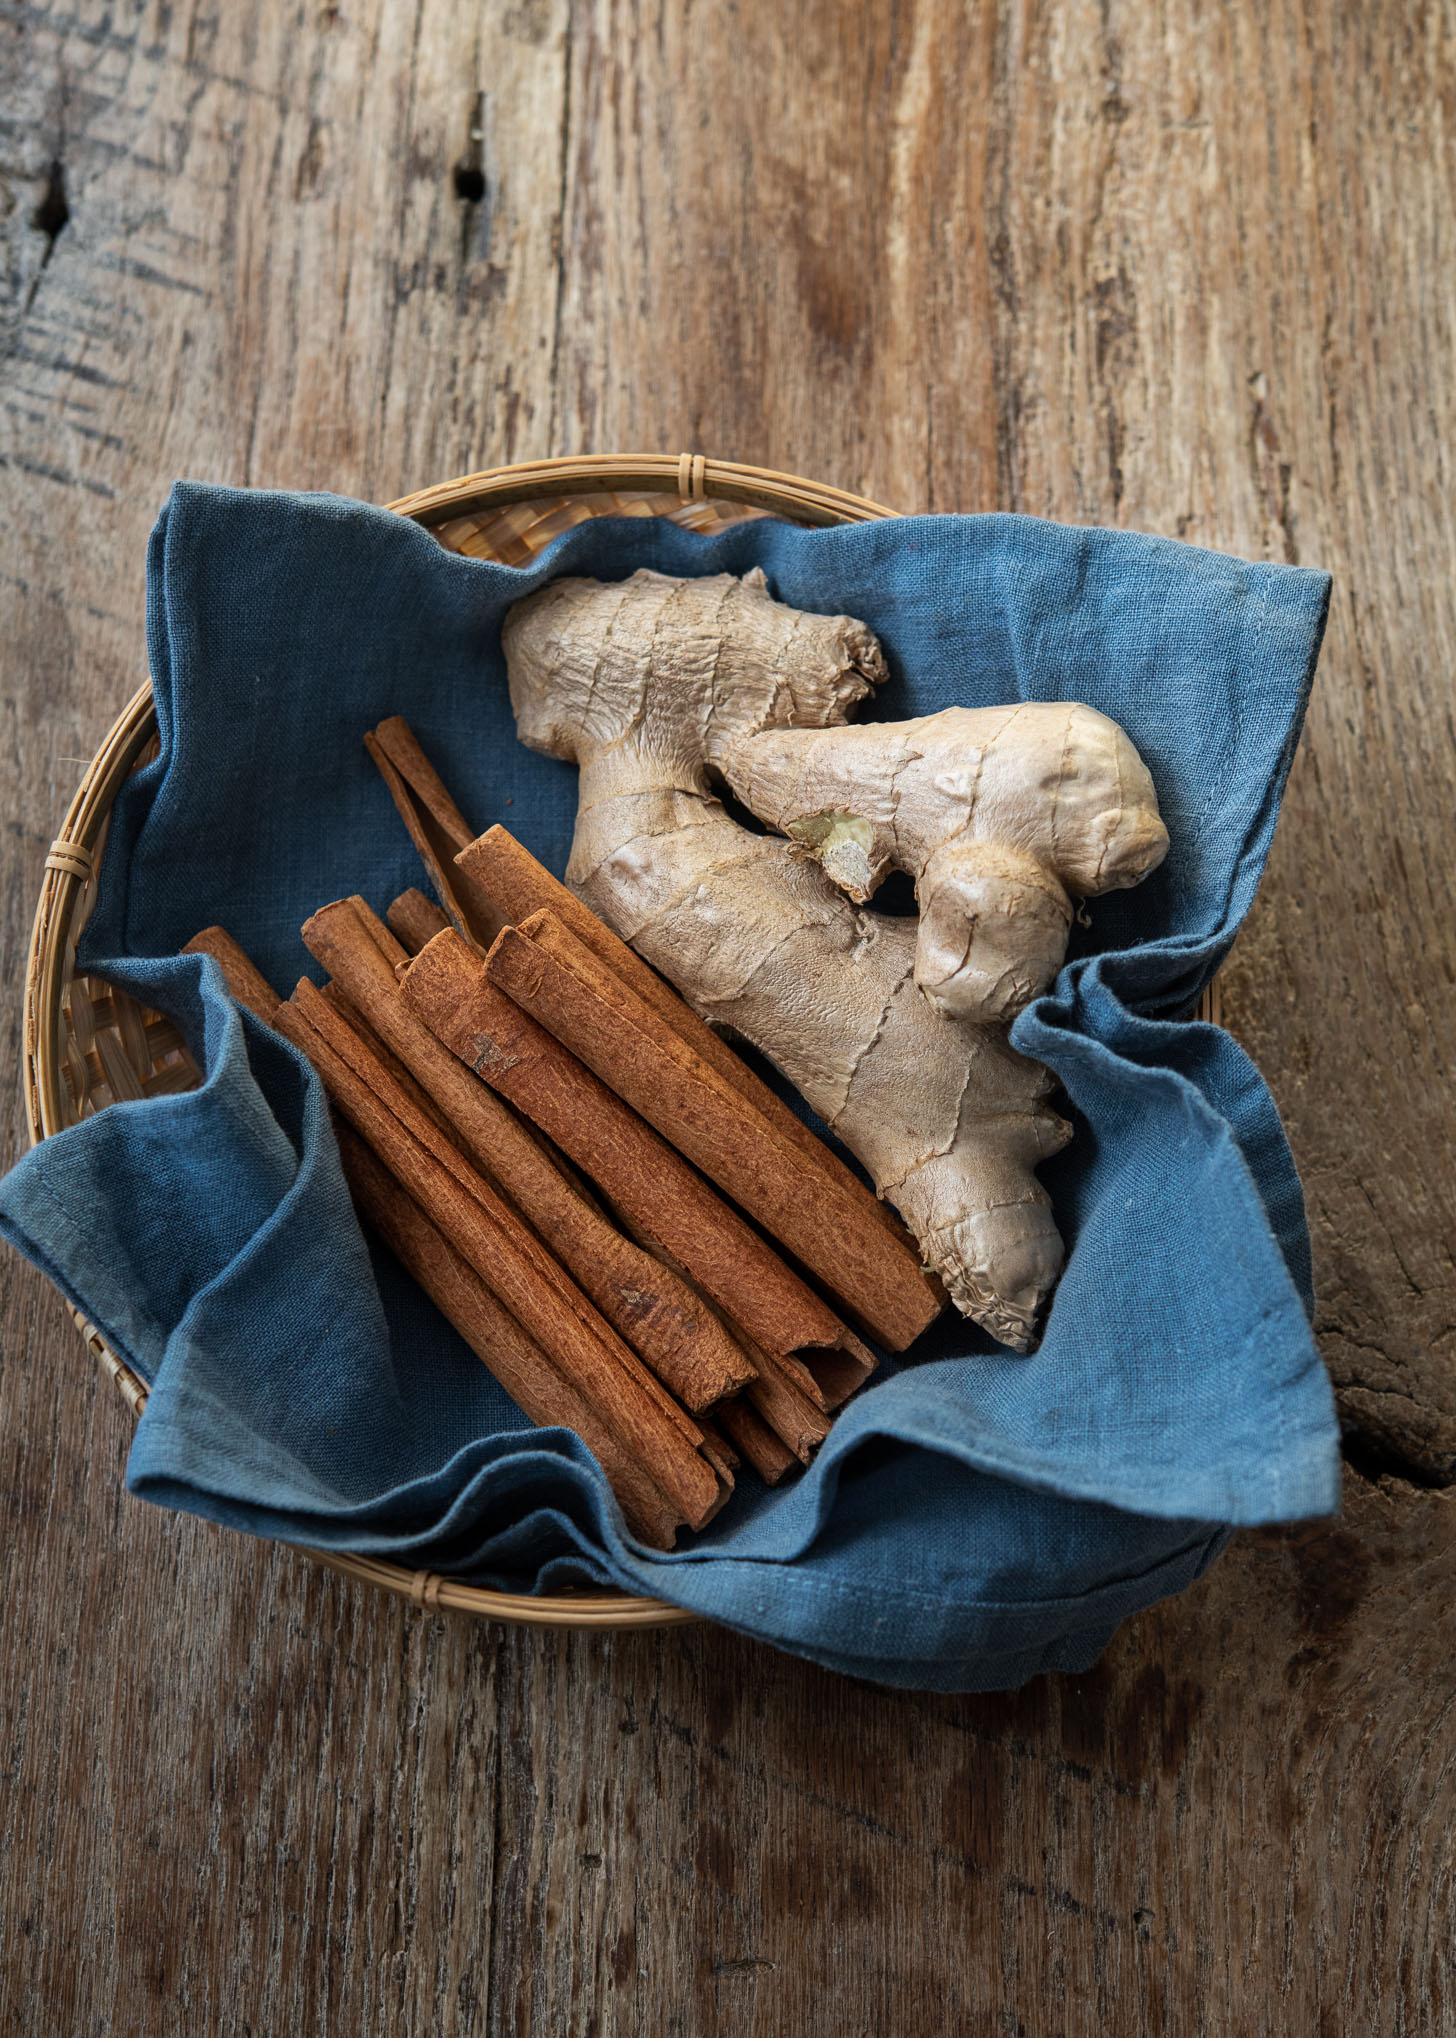 Cinnamon sticks and ginger are in a basket line with a blue napkin.